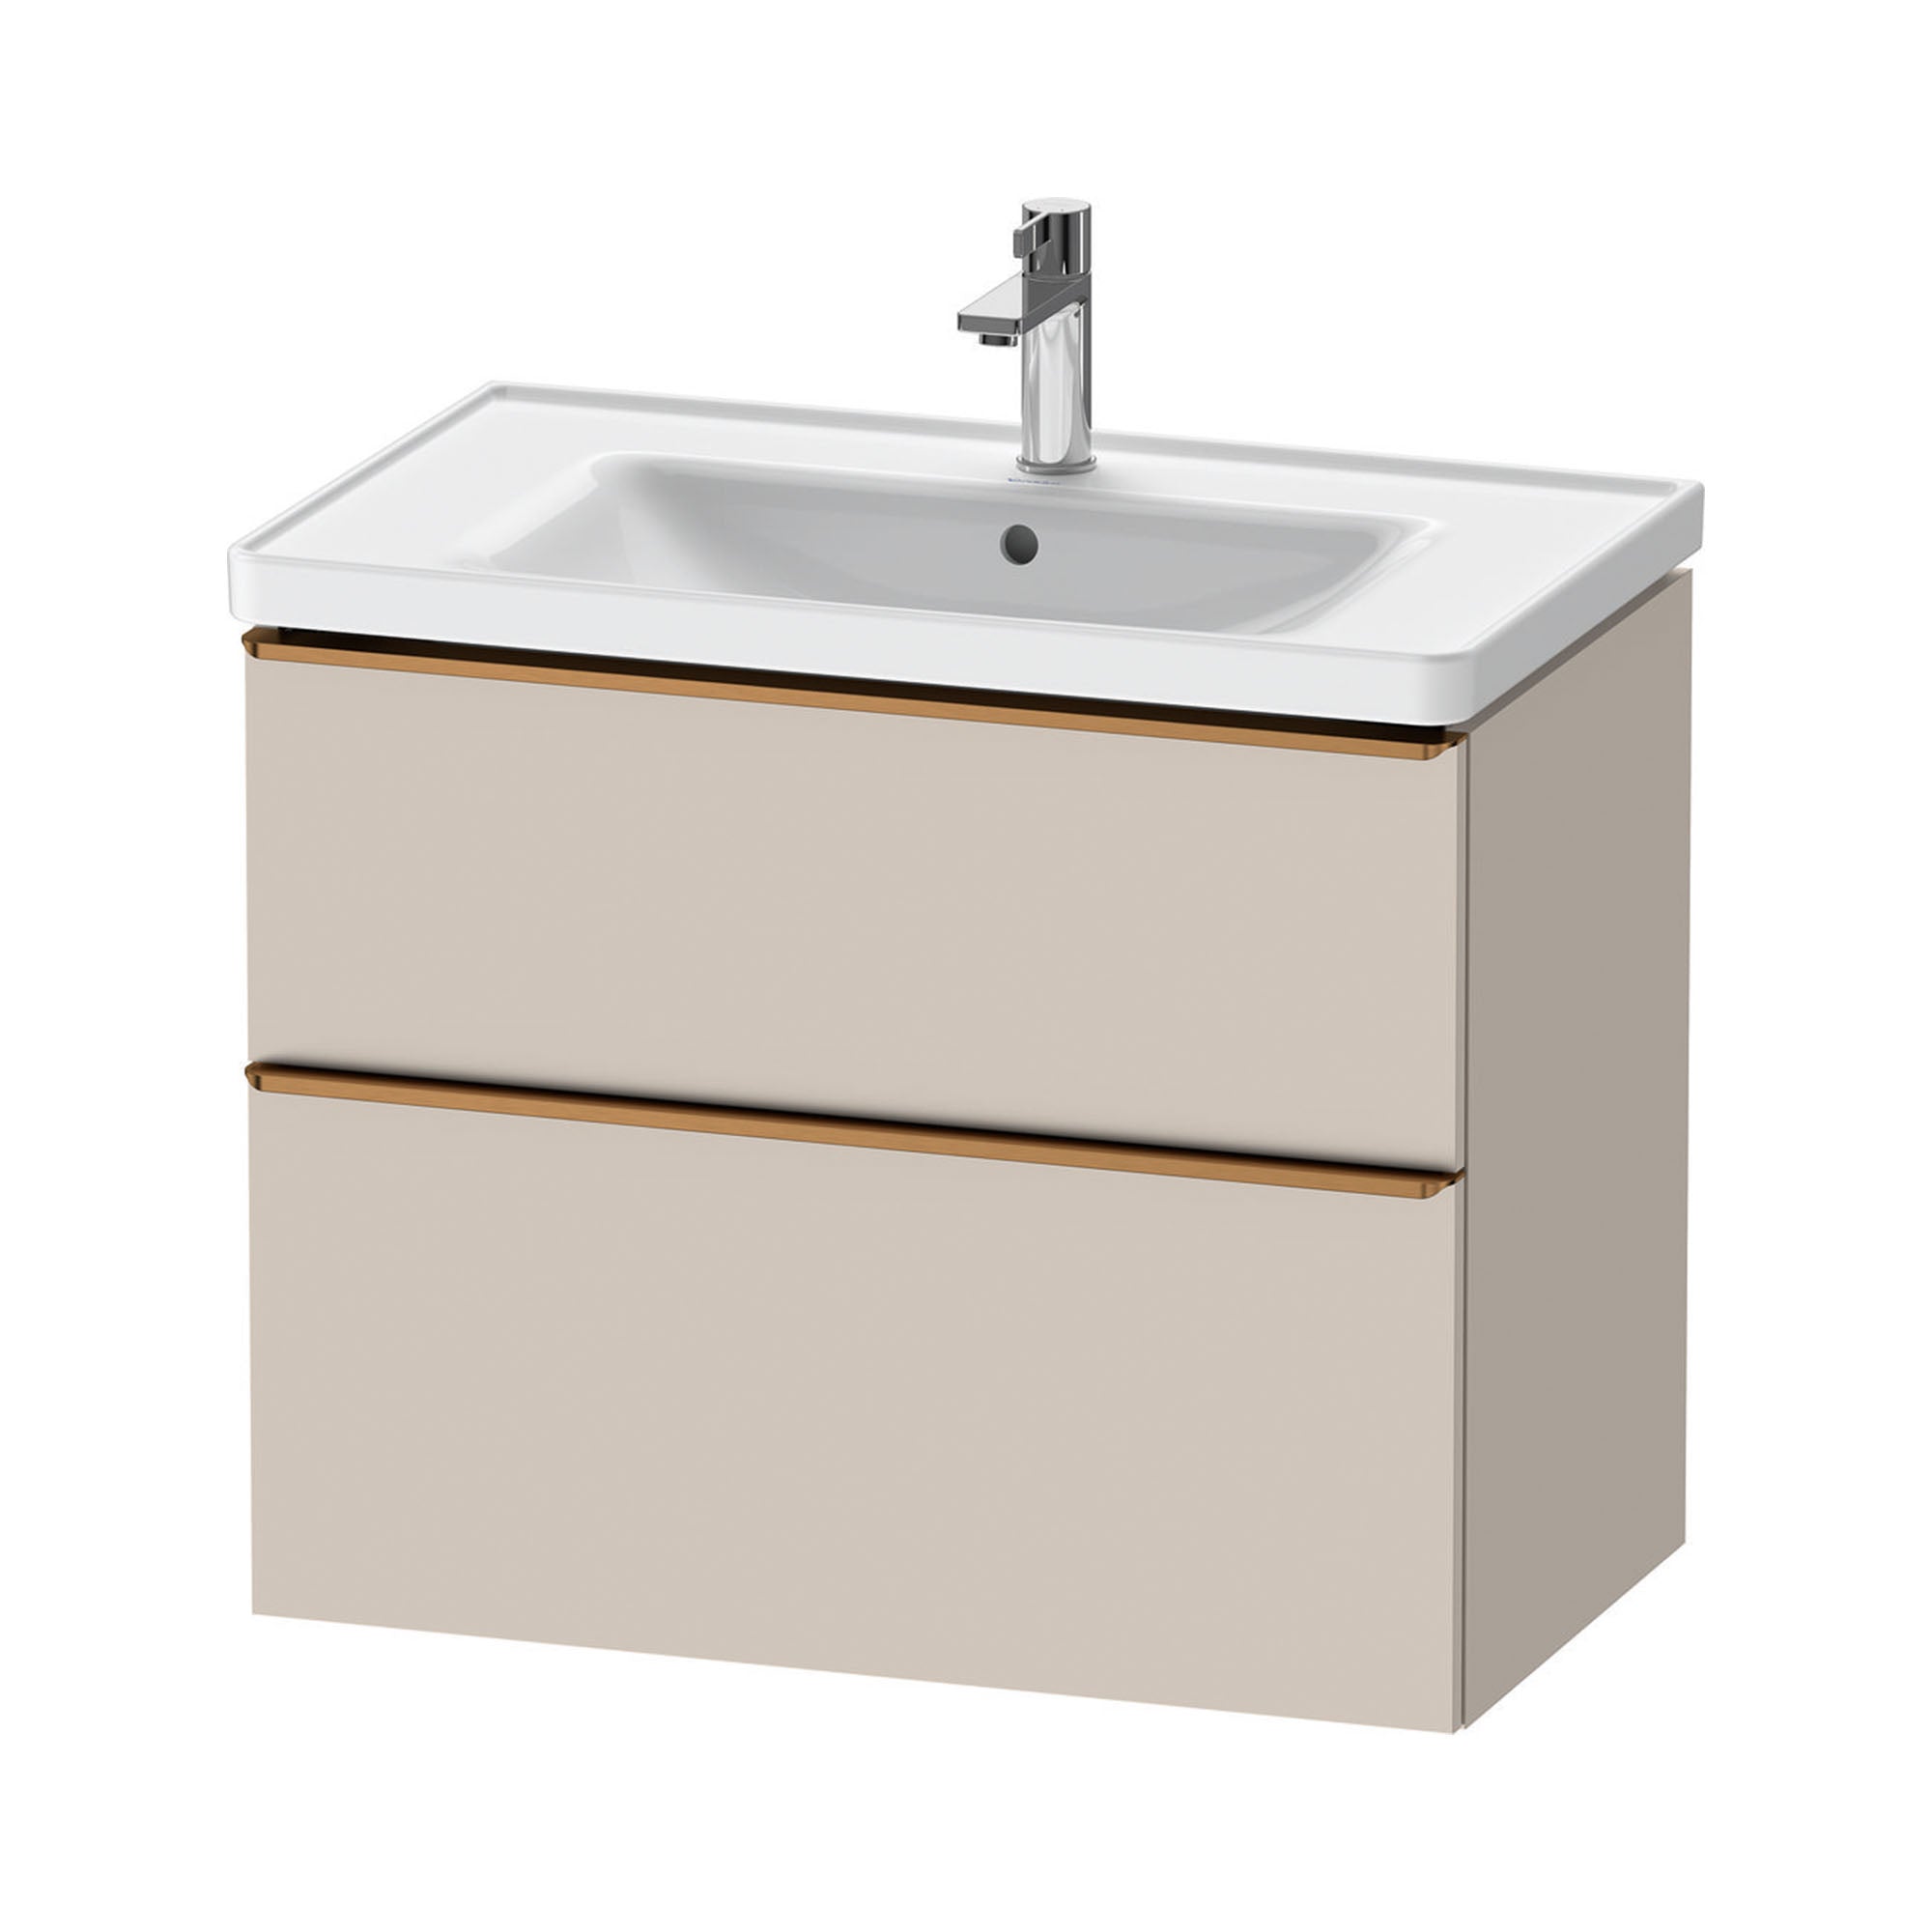 duravit d-neo 800mm wall mounted vanity unit with d-neo basin taupe brushed bronze handles